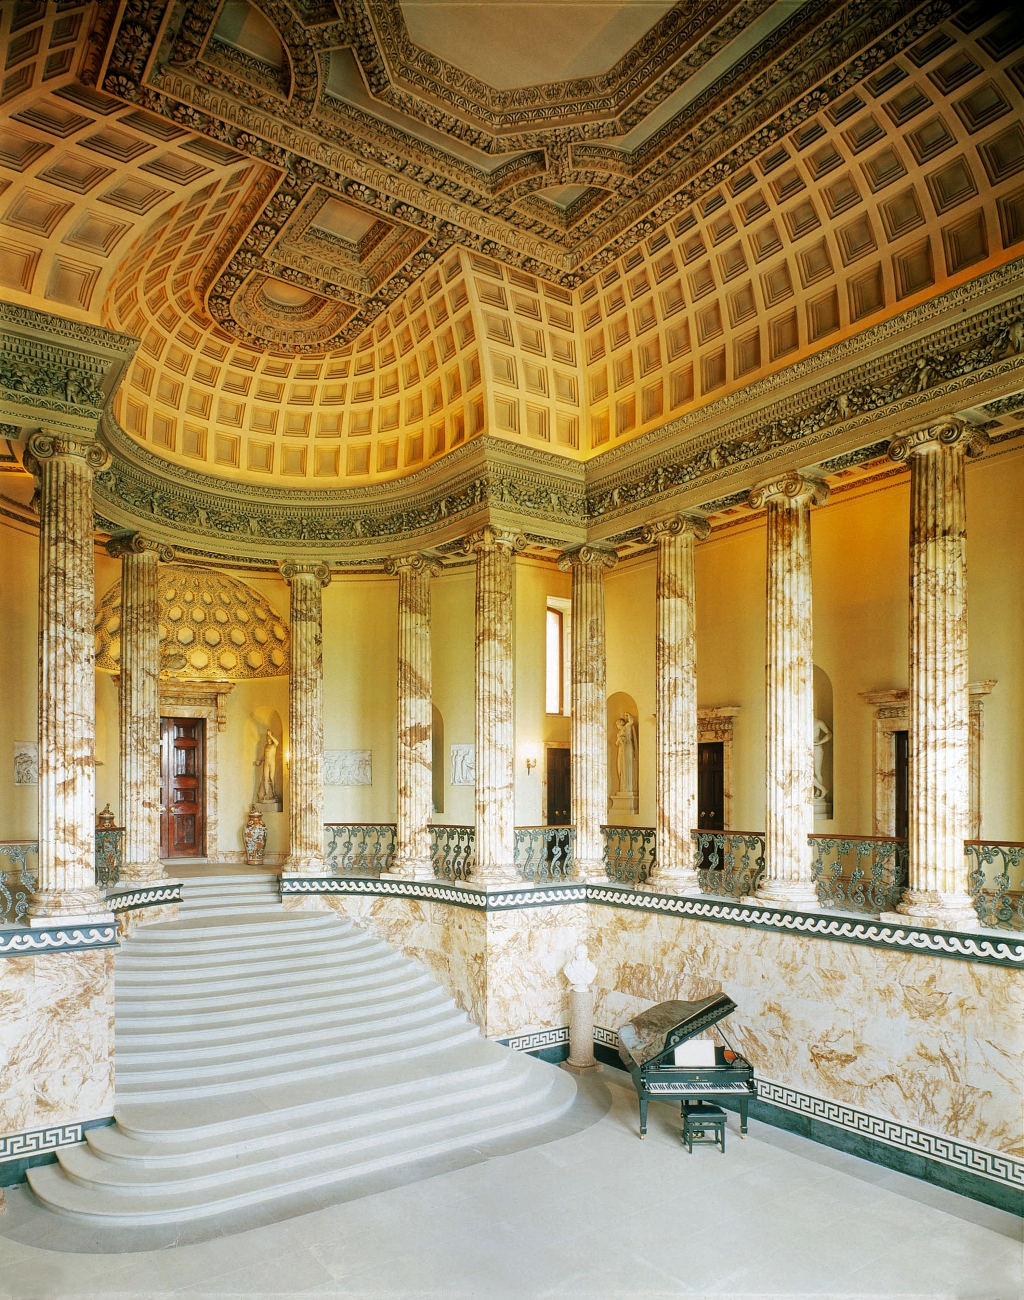 The Marble Hall Entrance of Holkham Hall